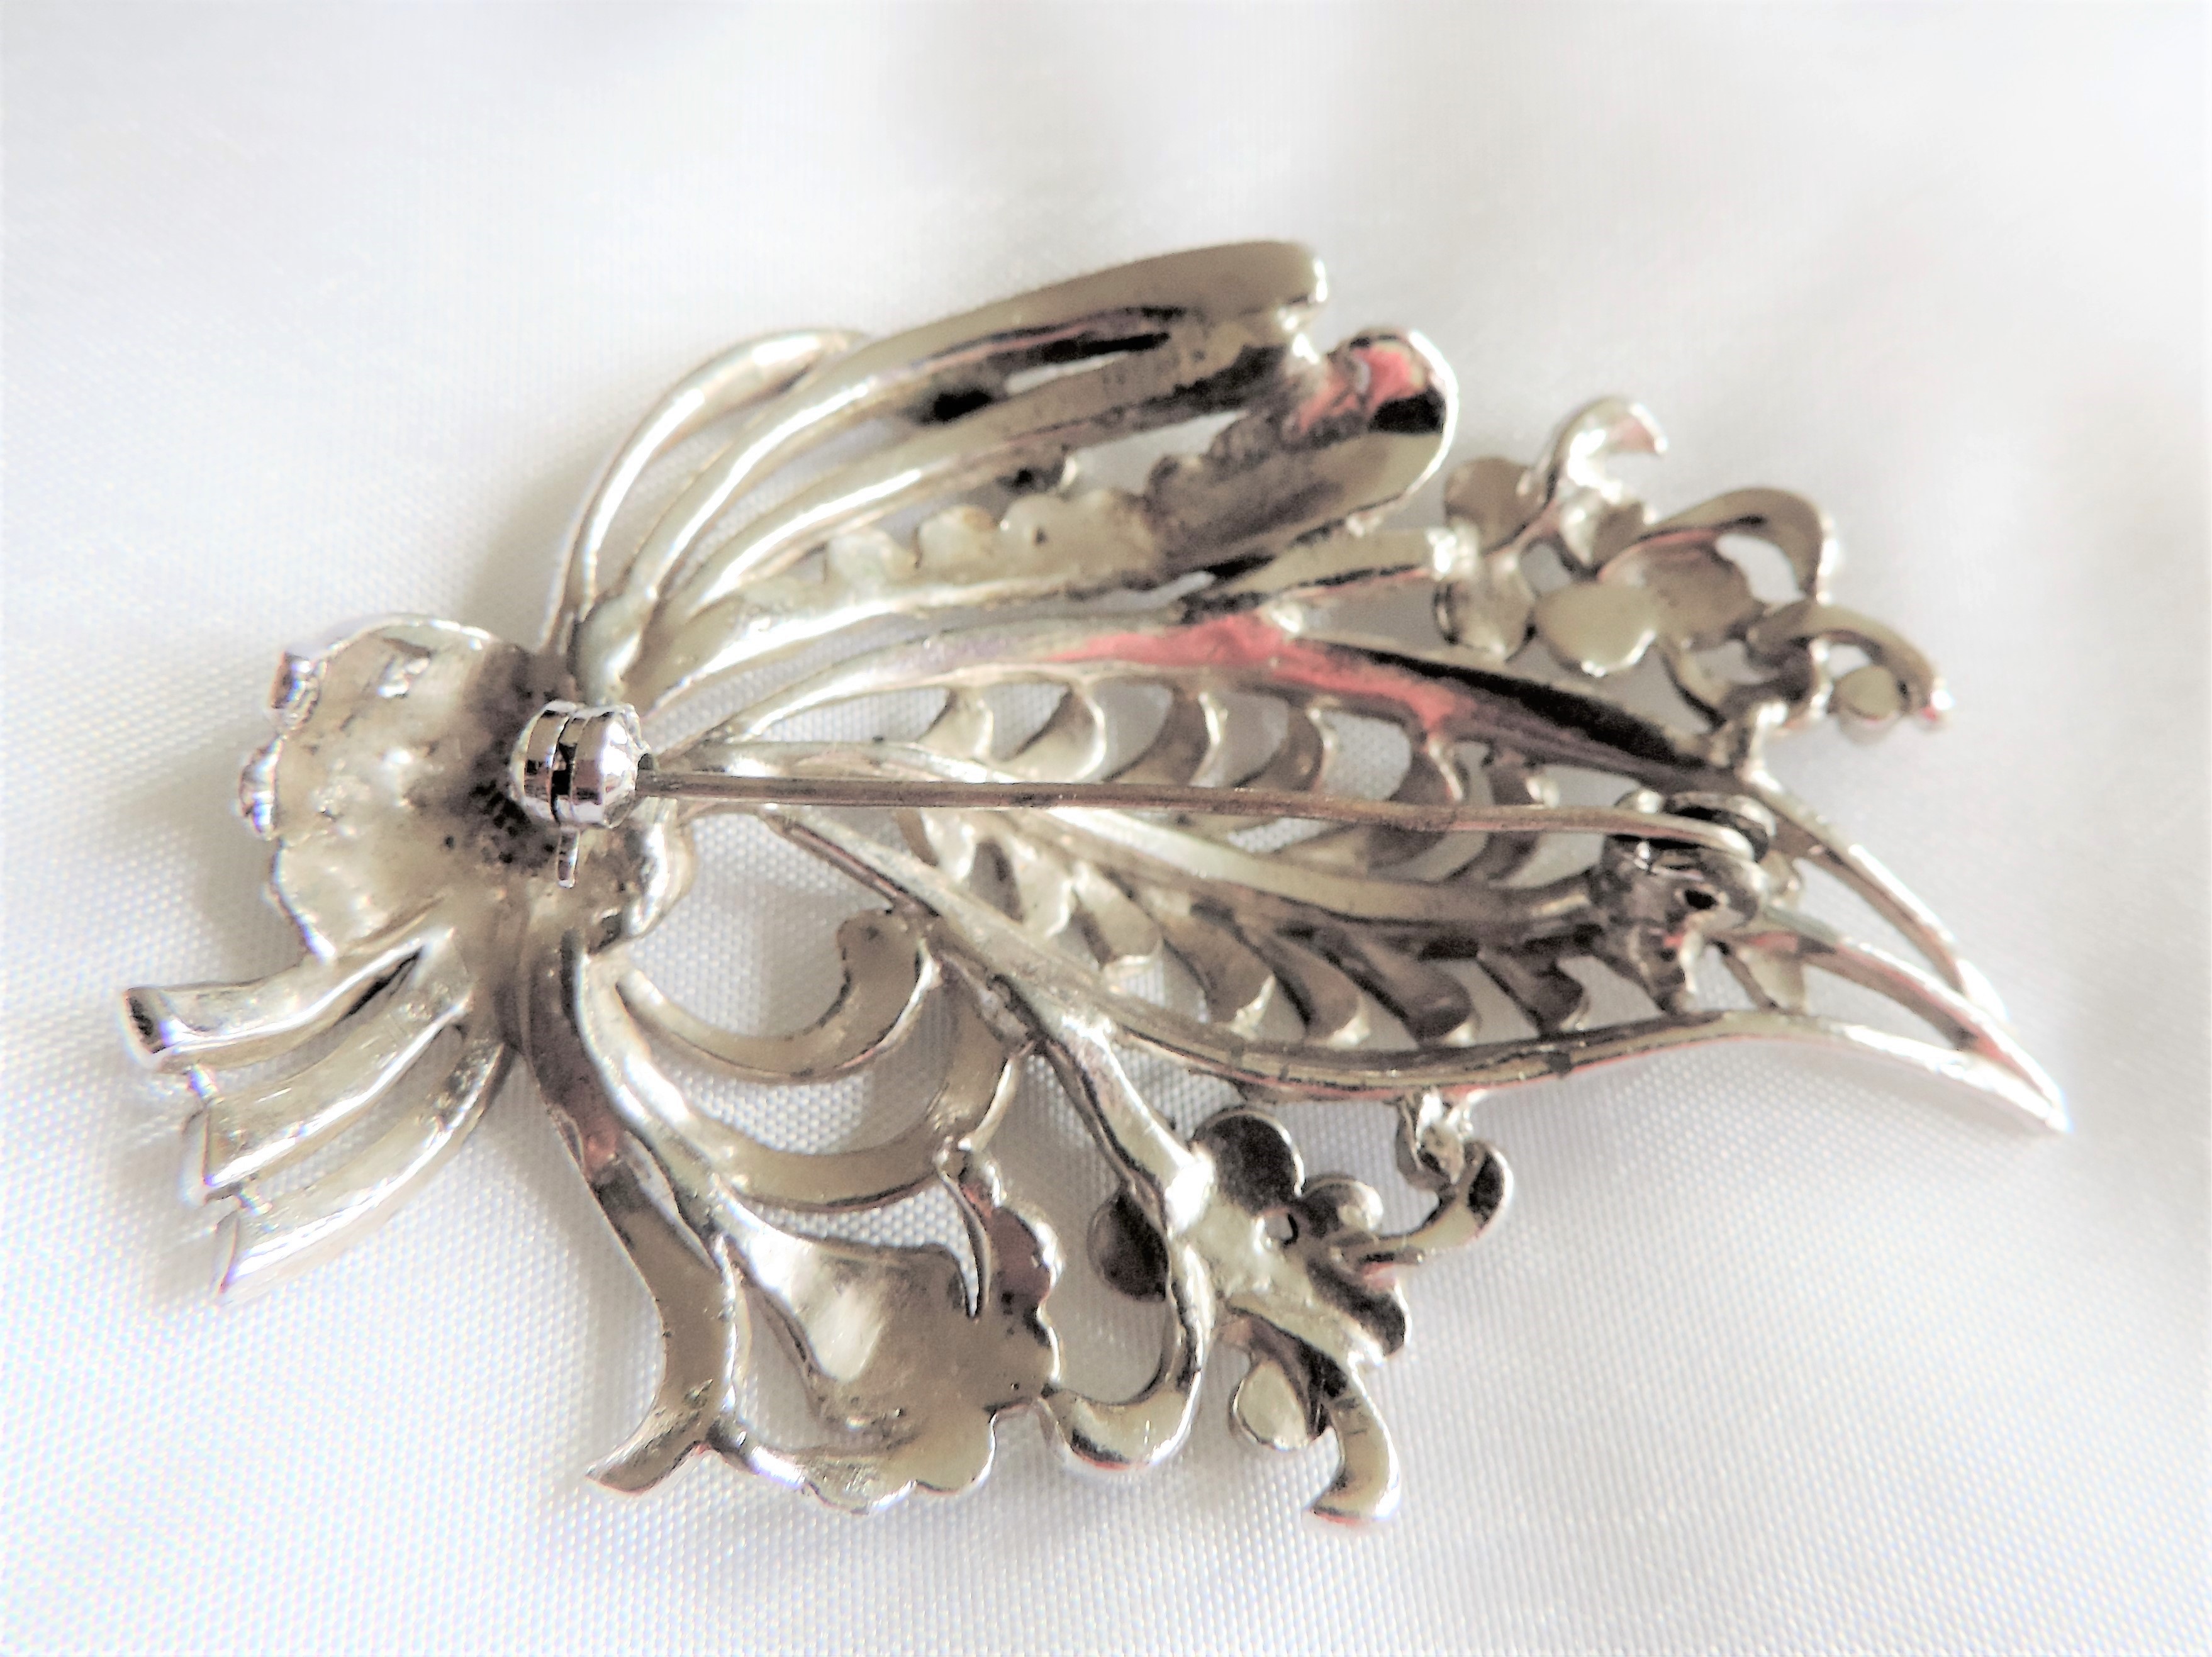 Vintage Marcasite Brooch 2.75 inches wide - Image 2 of 2